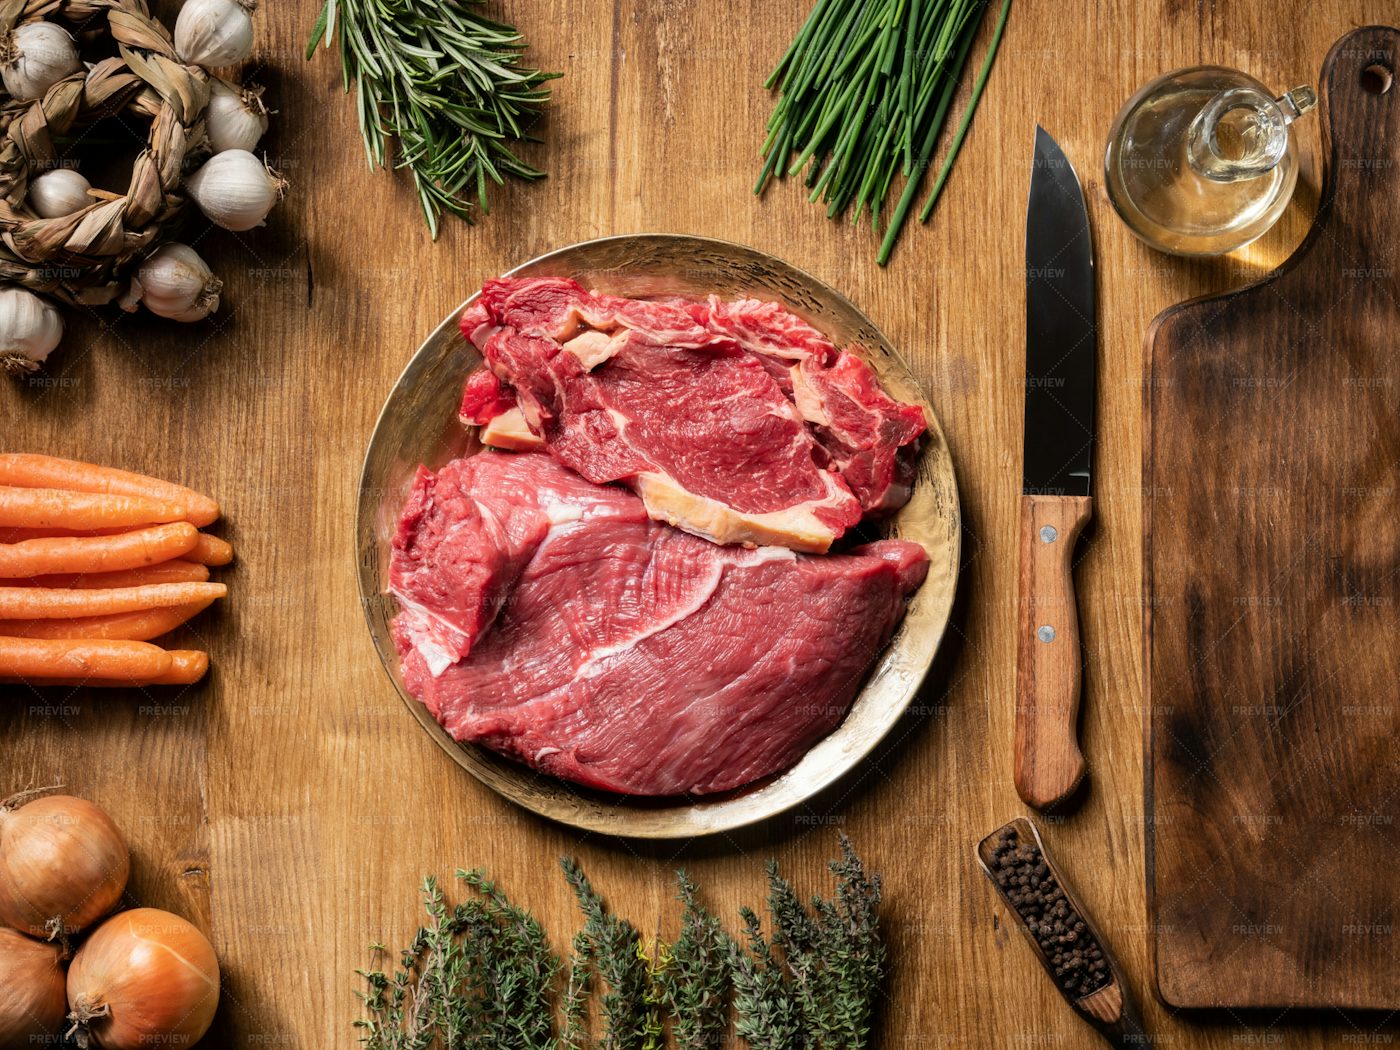 Raw Meat In A Plate - Stock Photos | Motion Array